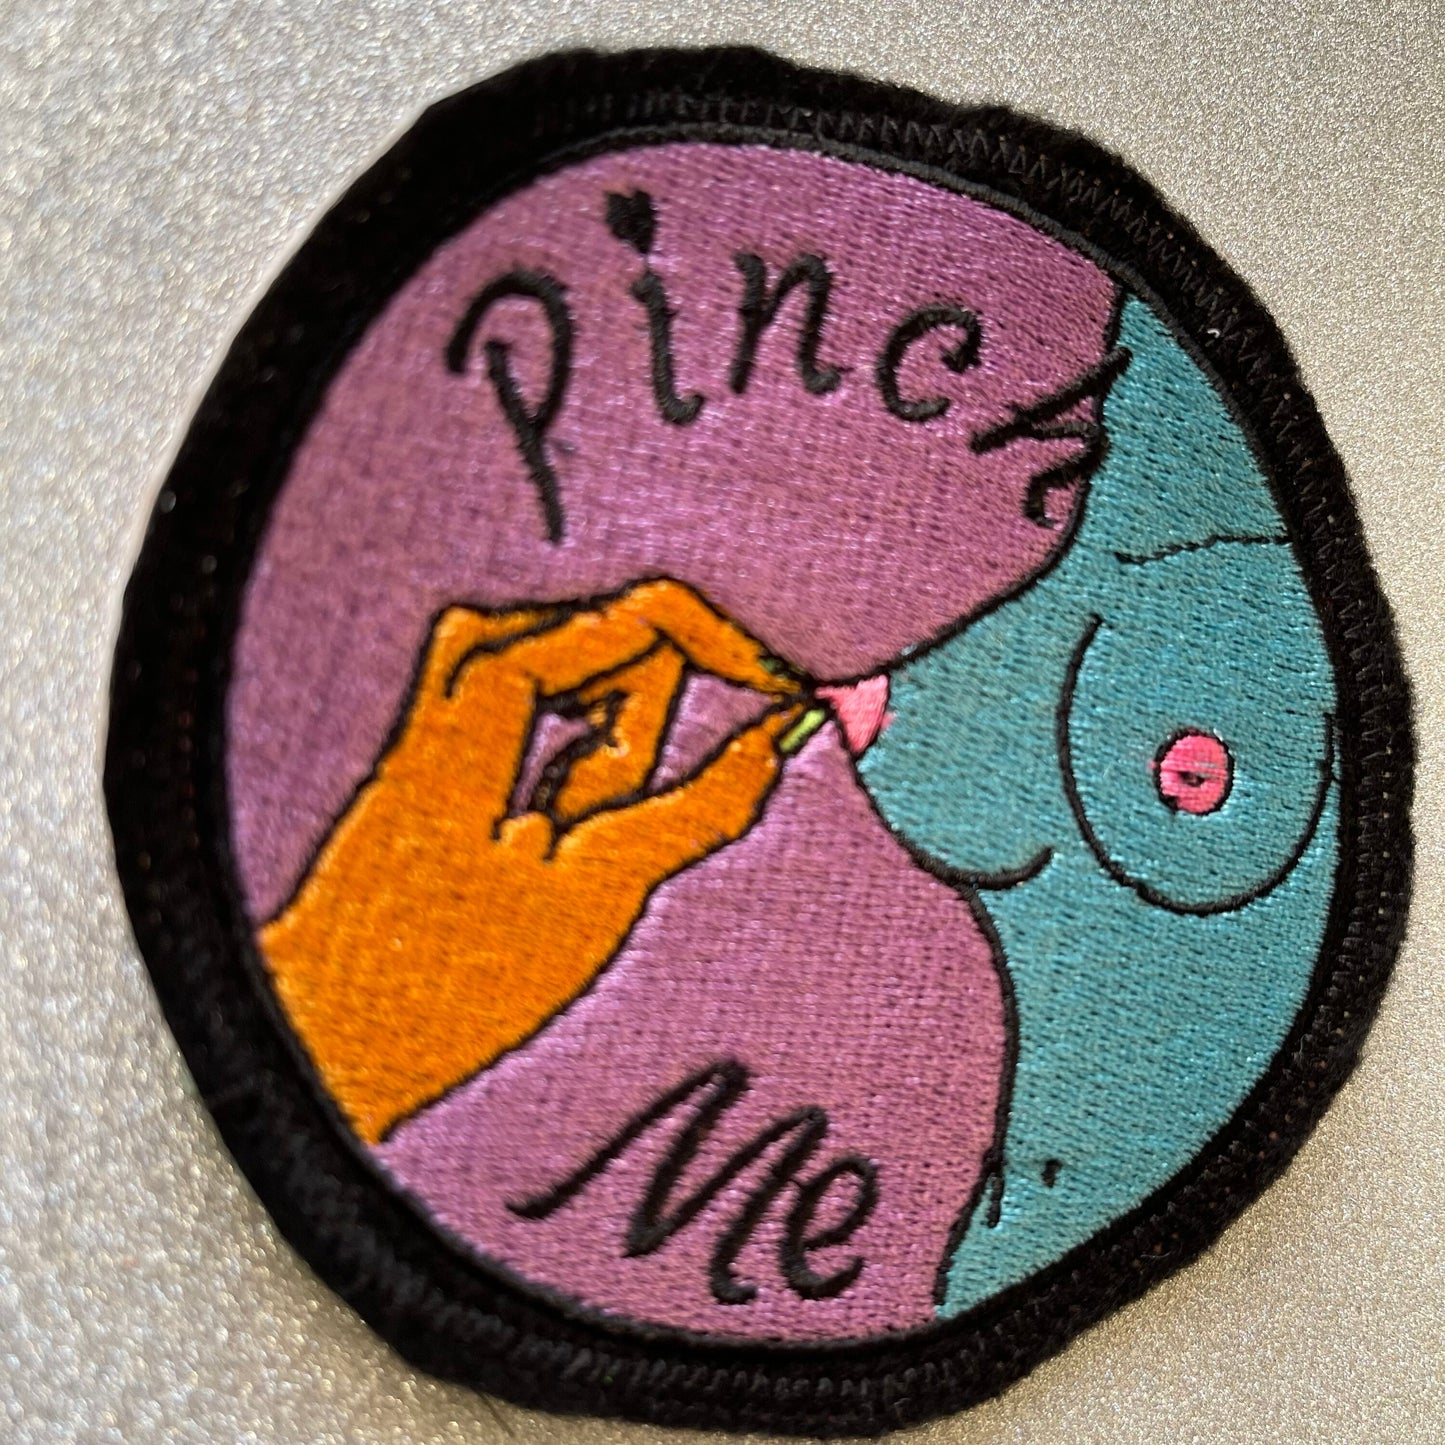 pinch me embroidered patch